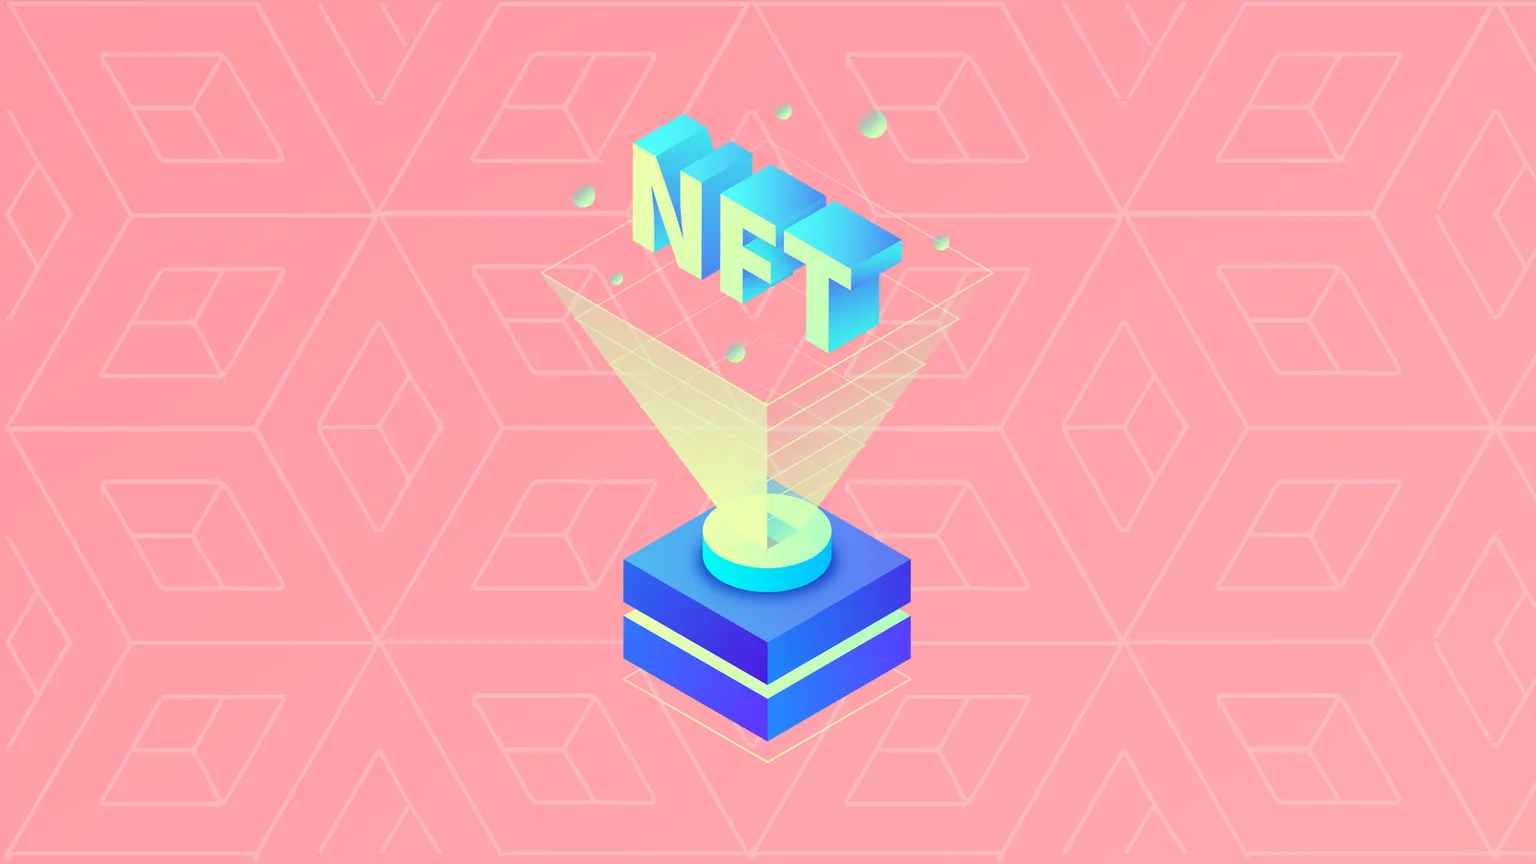 NFTs, or non-fungible tokens, are cryptographically unique digital assets. Image: Decrypt